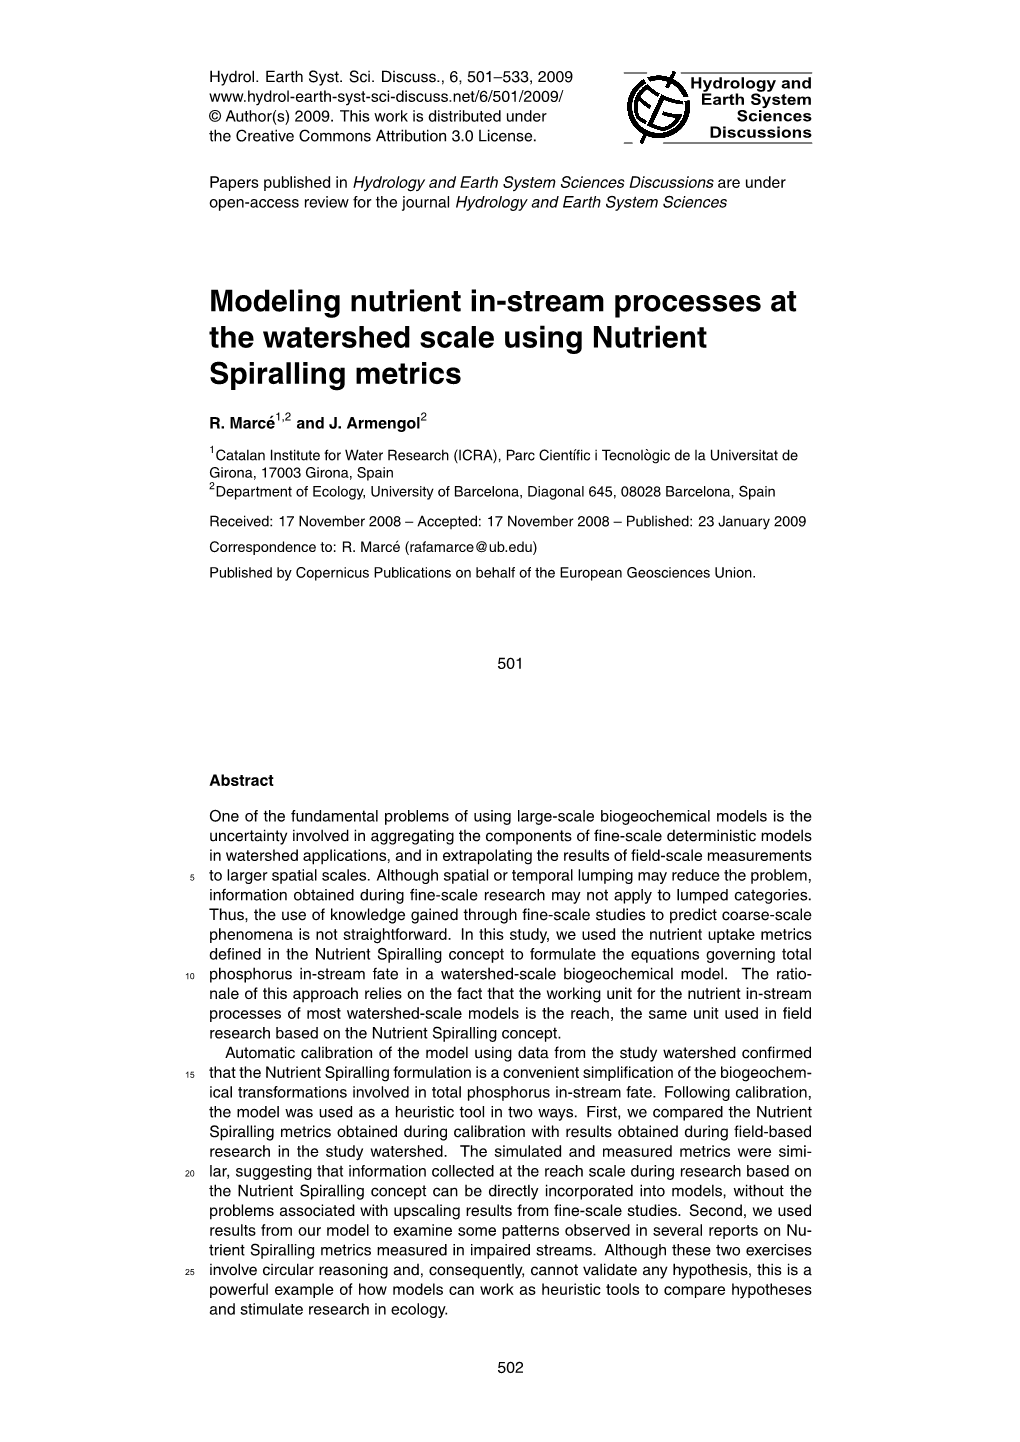 Modeling Nutrient In-Stream Processes at the Watershed Scale Using Nutrient Spiralling Metrics